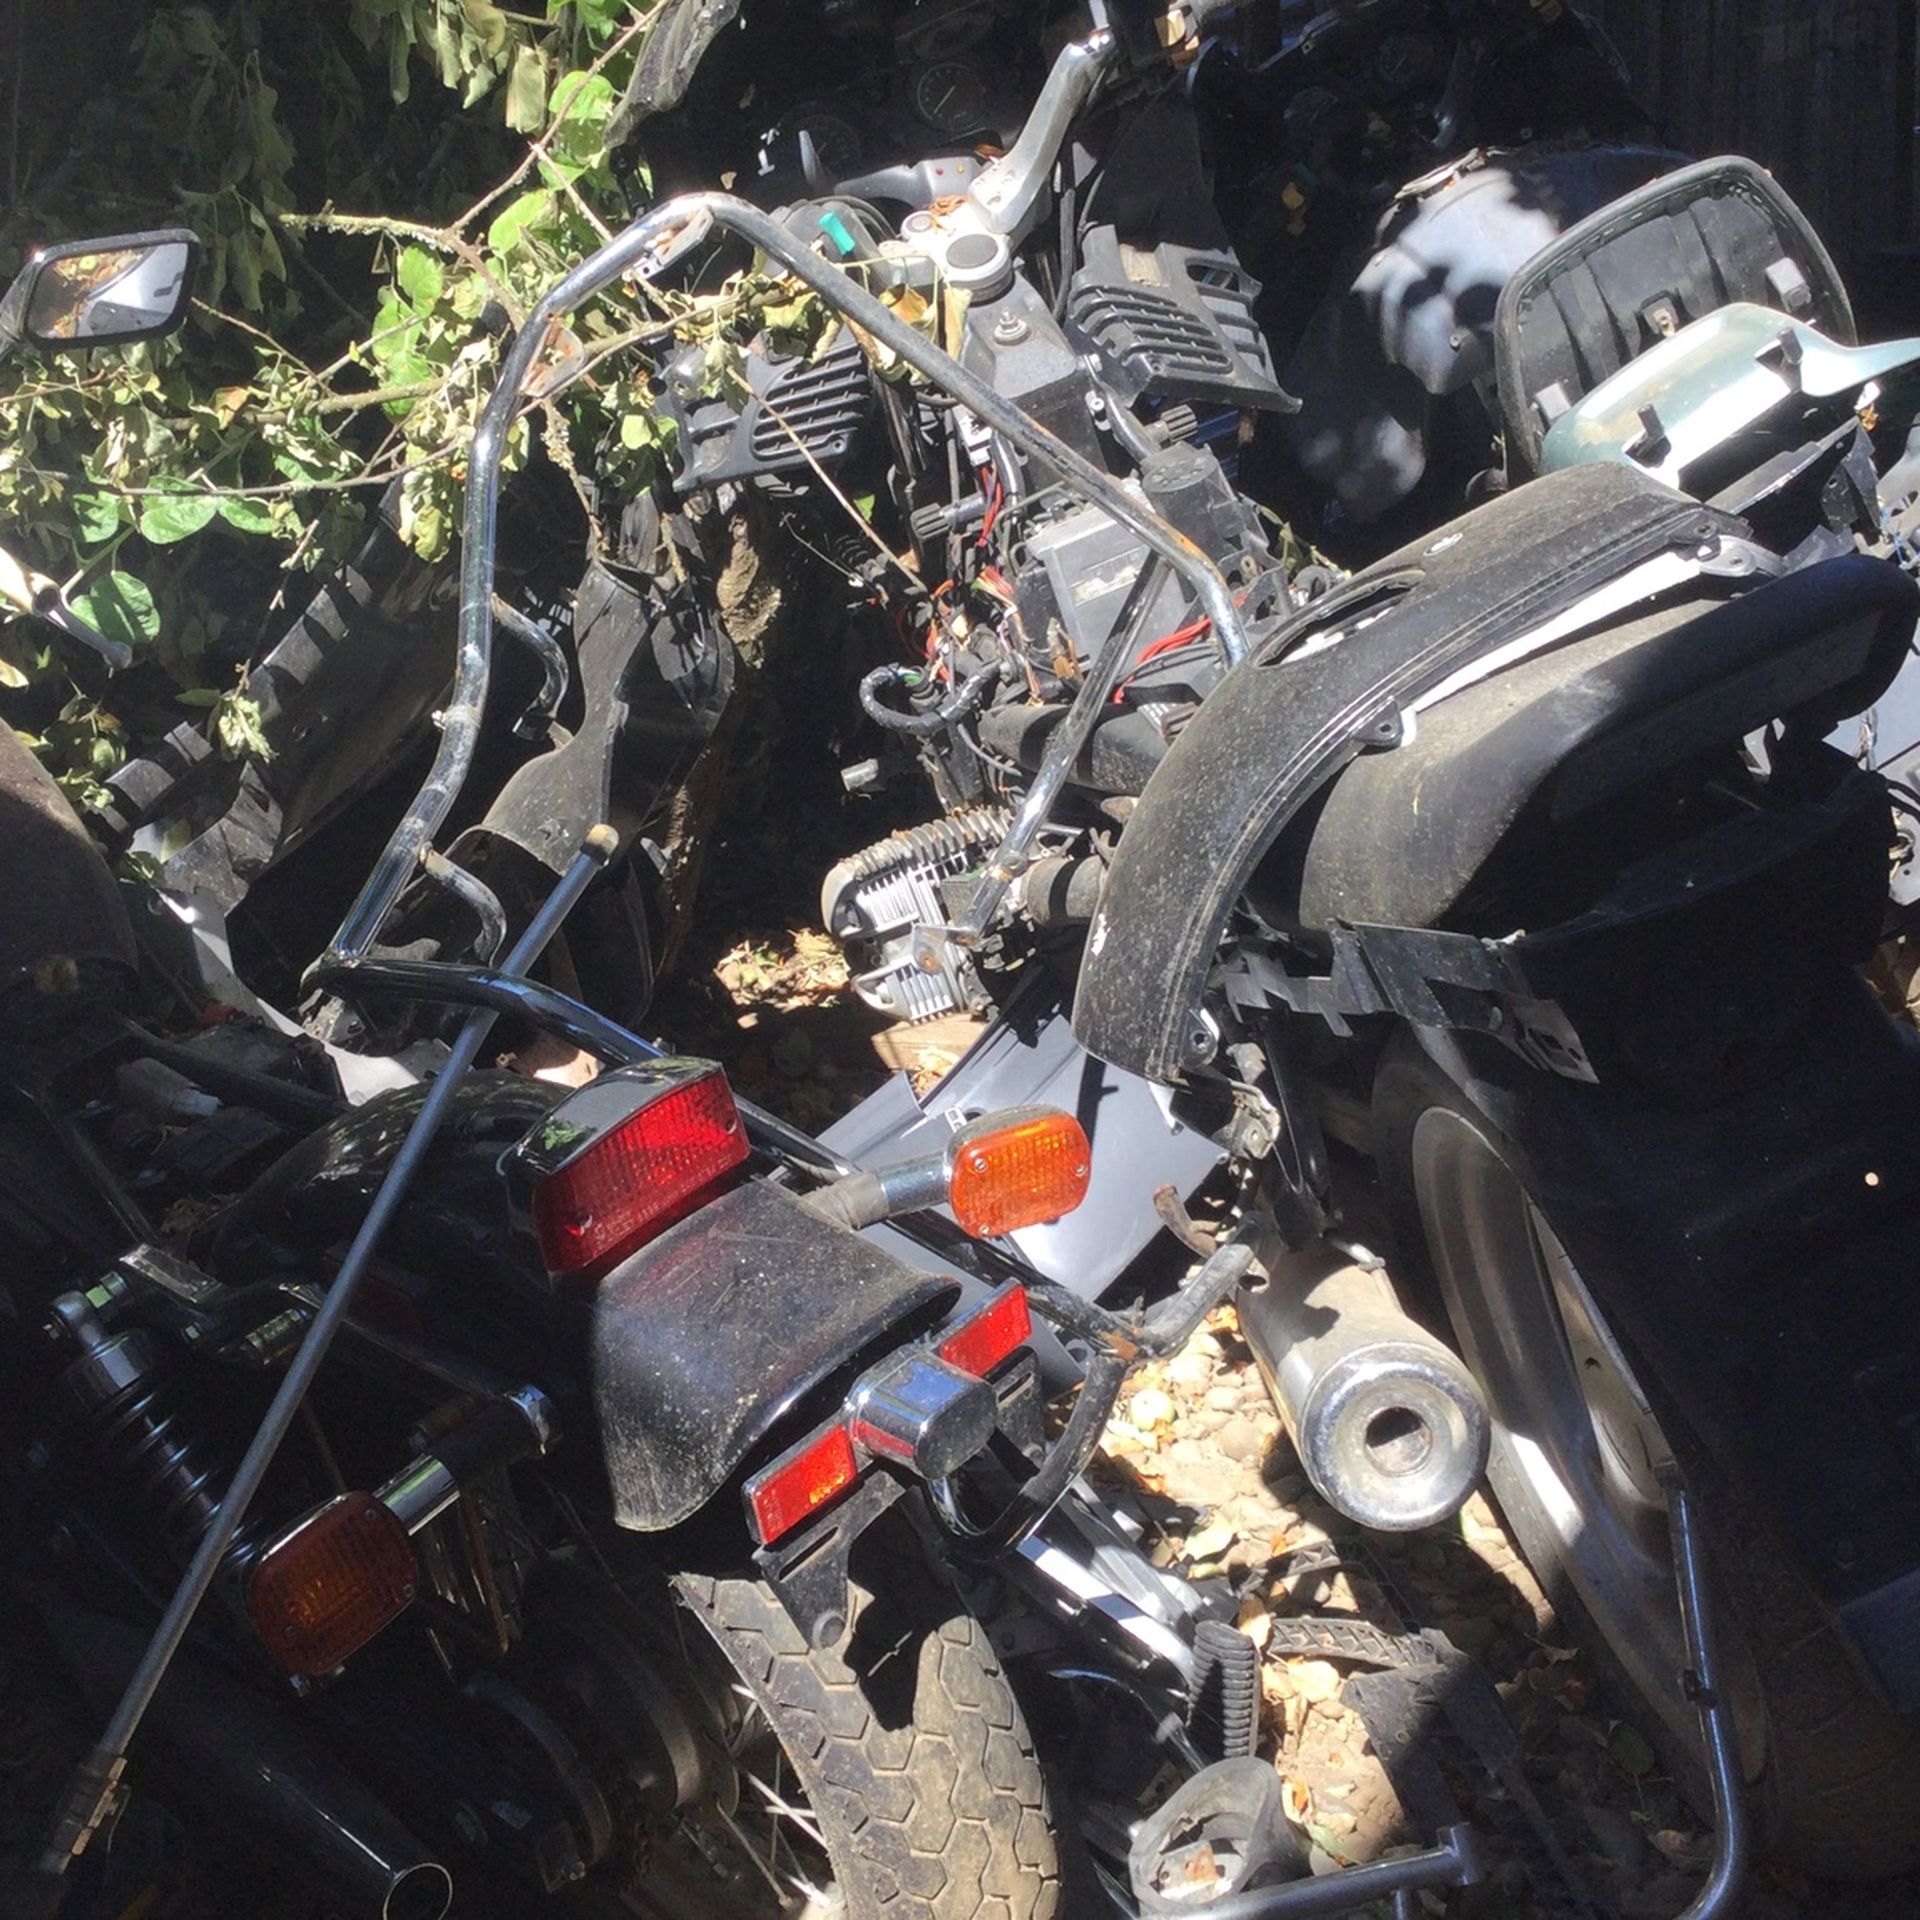 3 Motorcycle :  02 RT 1100 BMW 98 99 & O1 Honda Rebel (contact info removed)